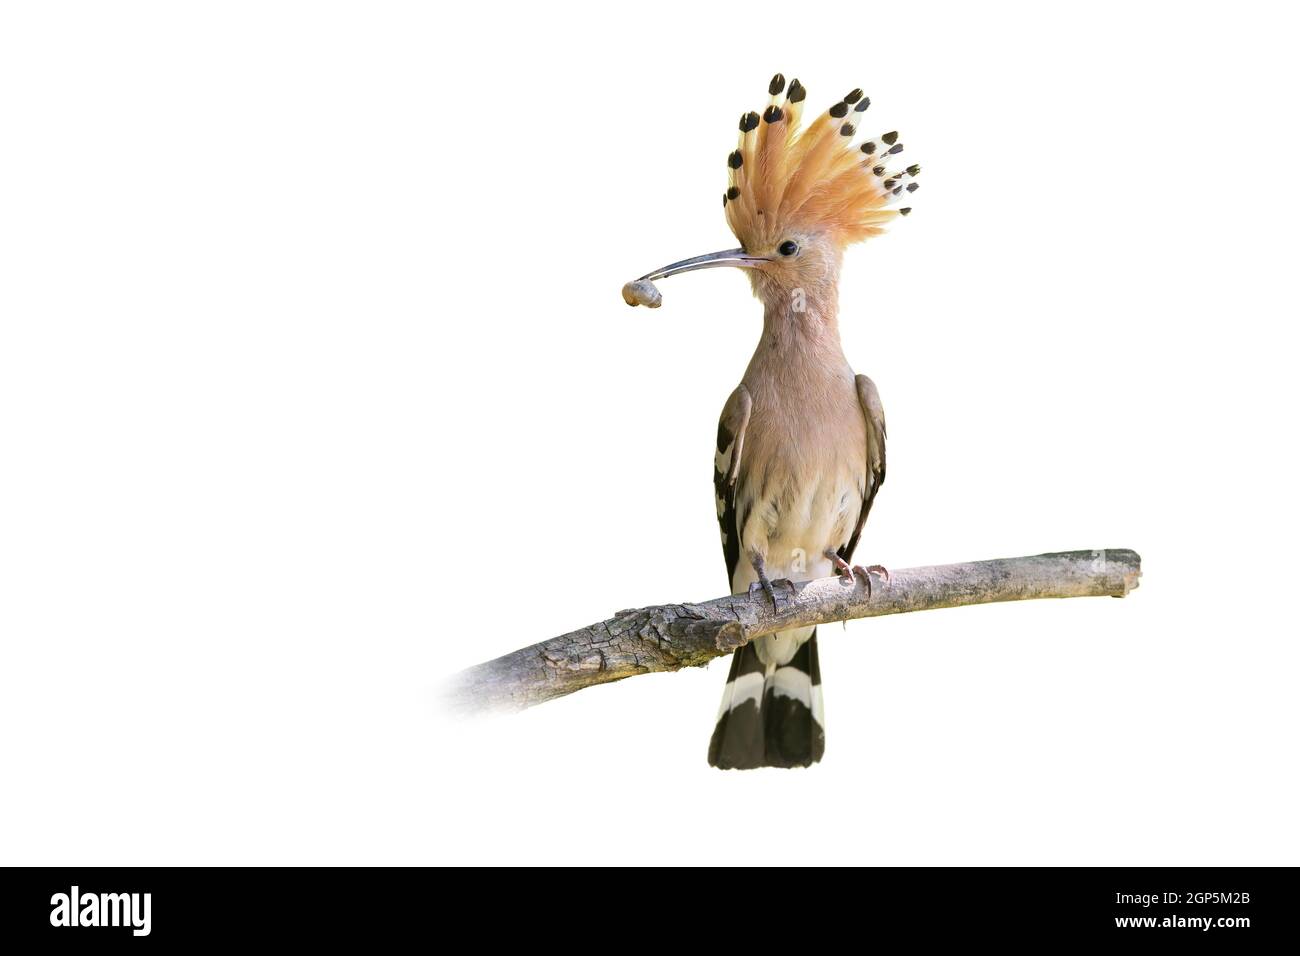 Eurasian hoopoe, upupa epops, holding worm in beak with copy space. Winged animal with orange crest sitting on branch isloated on white background. Bi Stock Photo